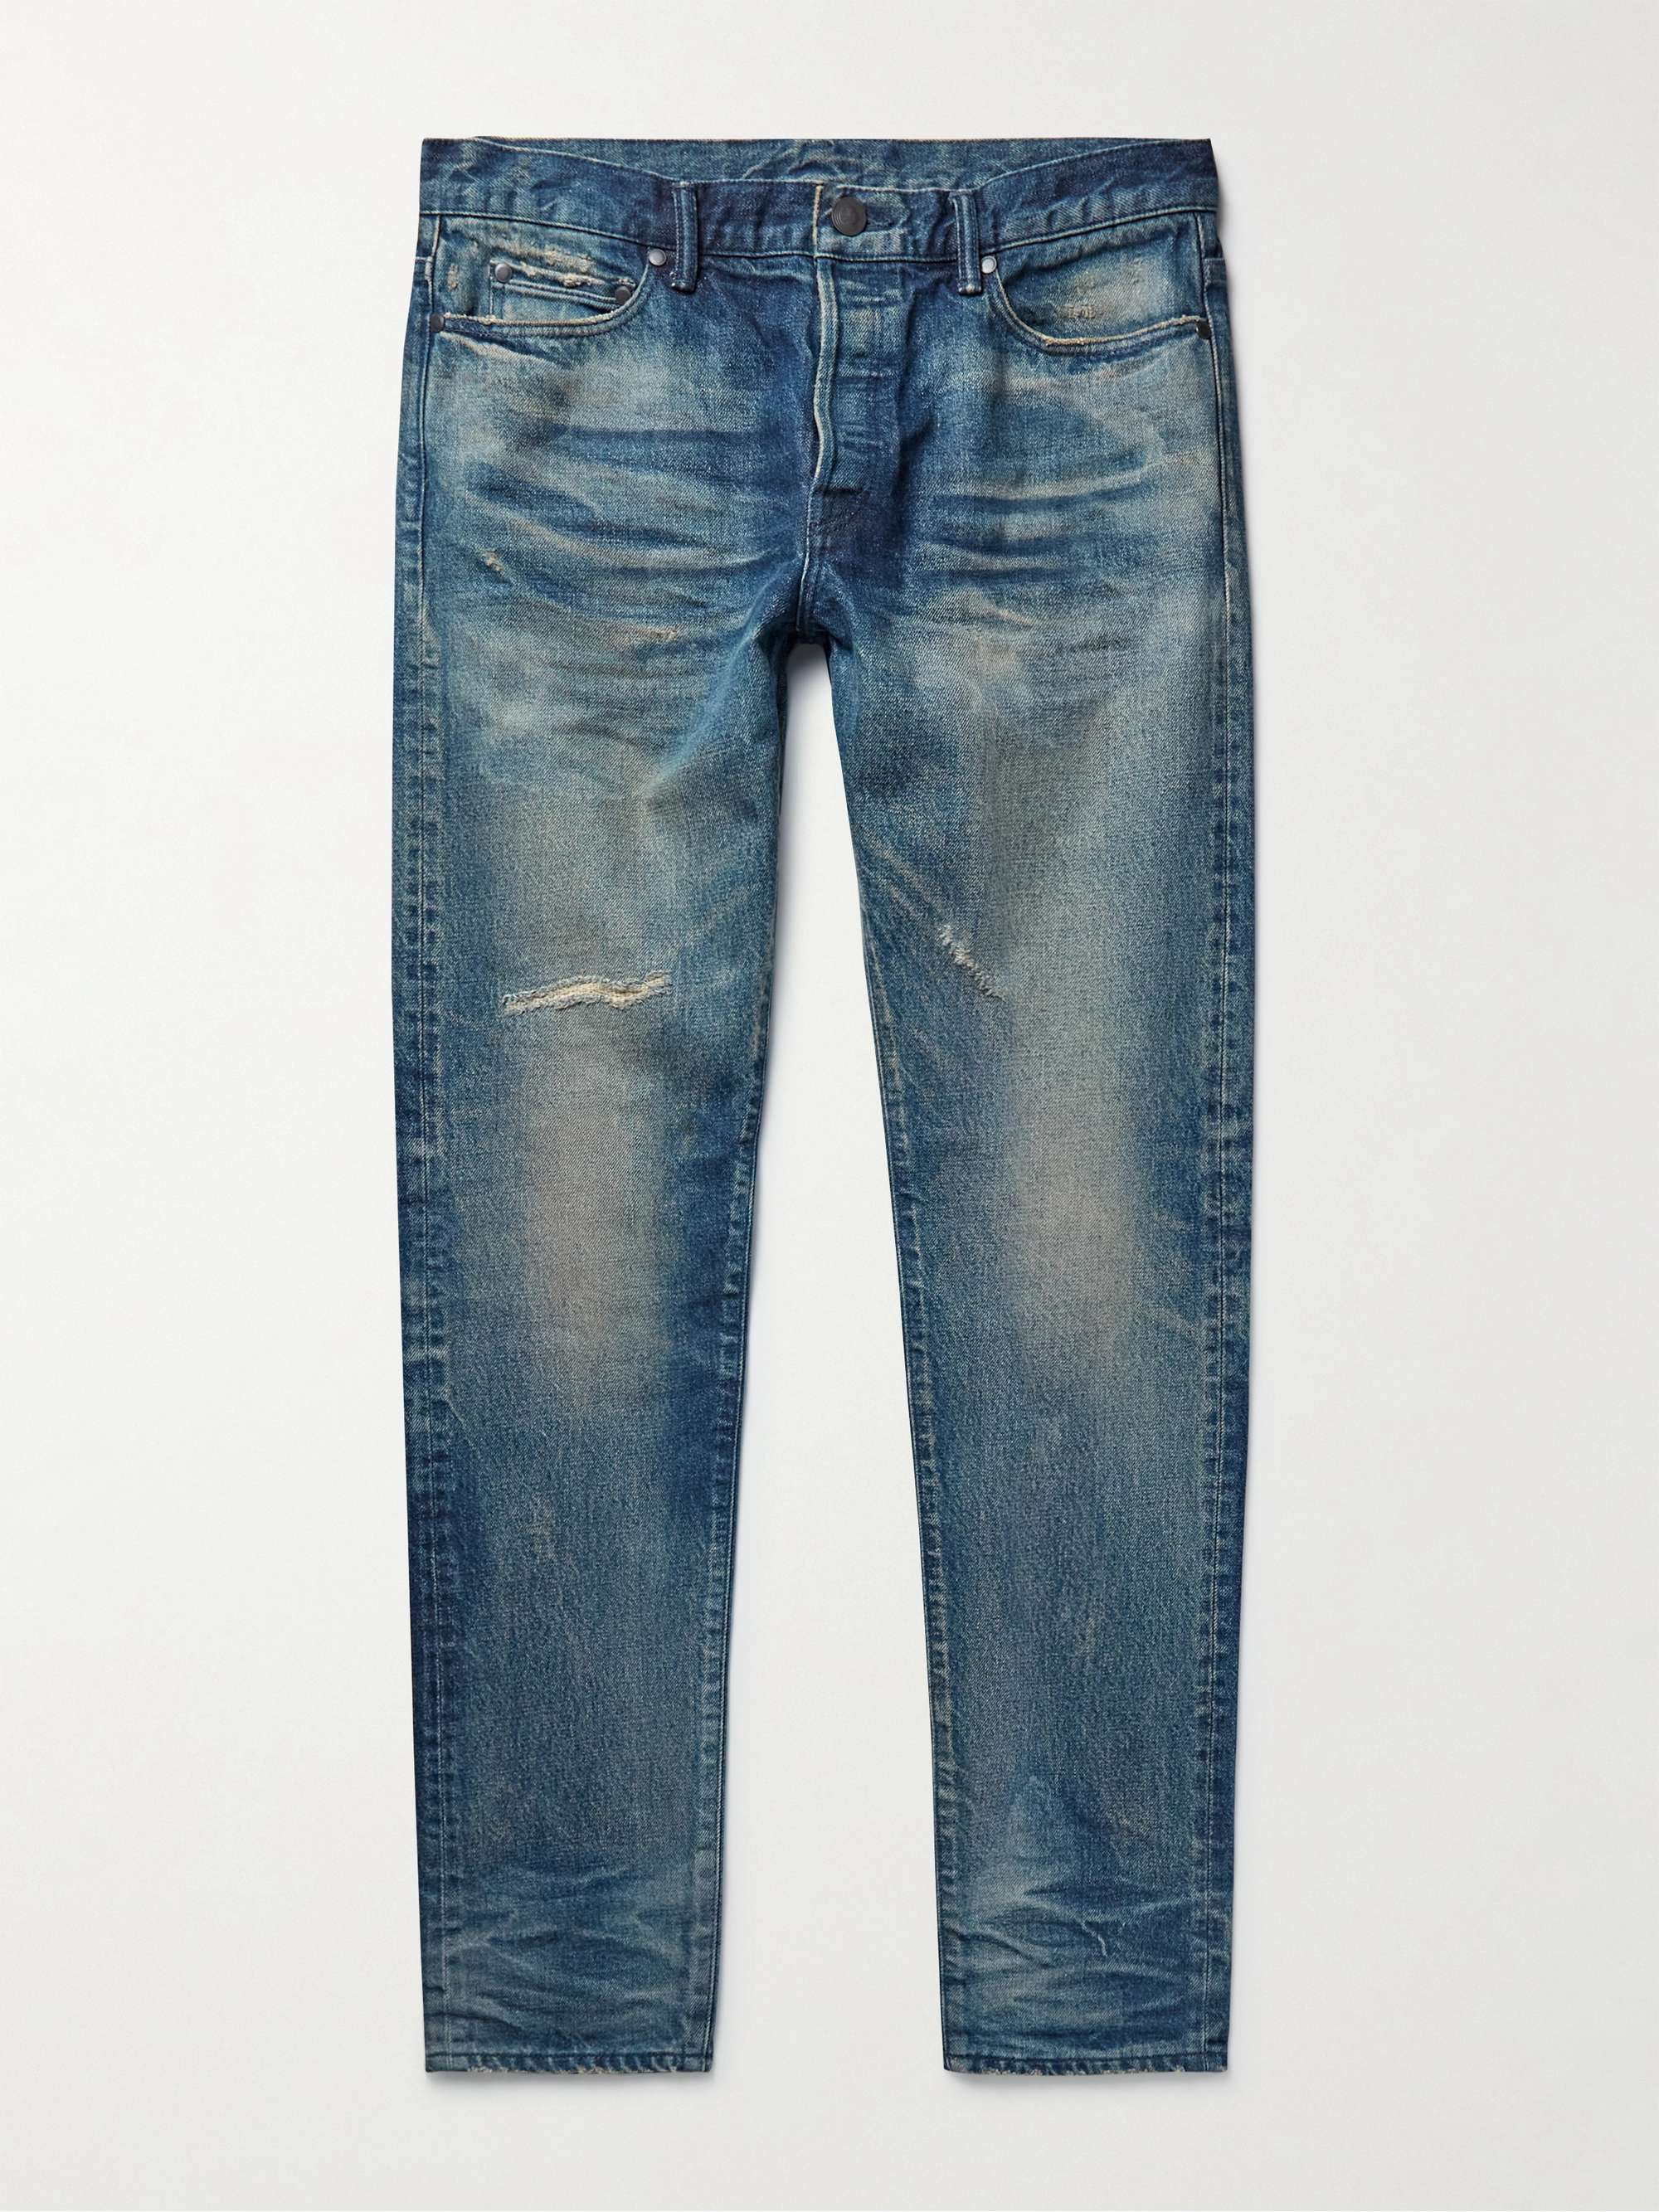 The Cast 2 Slim-Fit Distressed Jeans